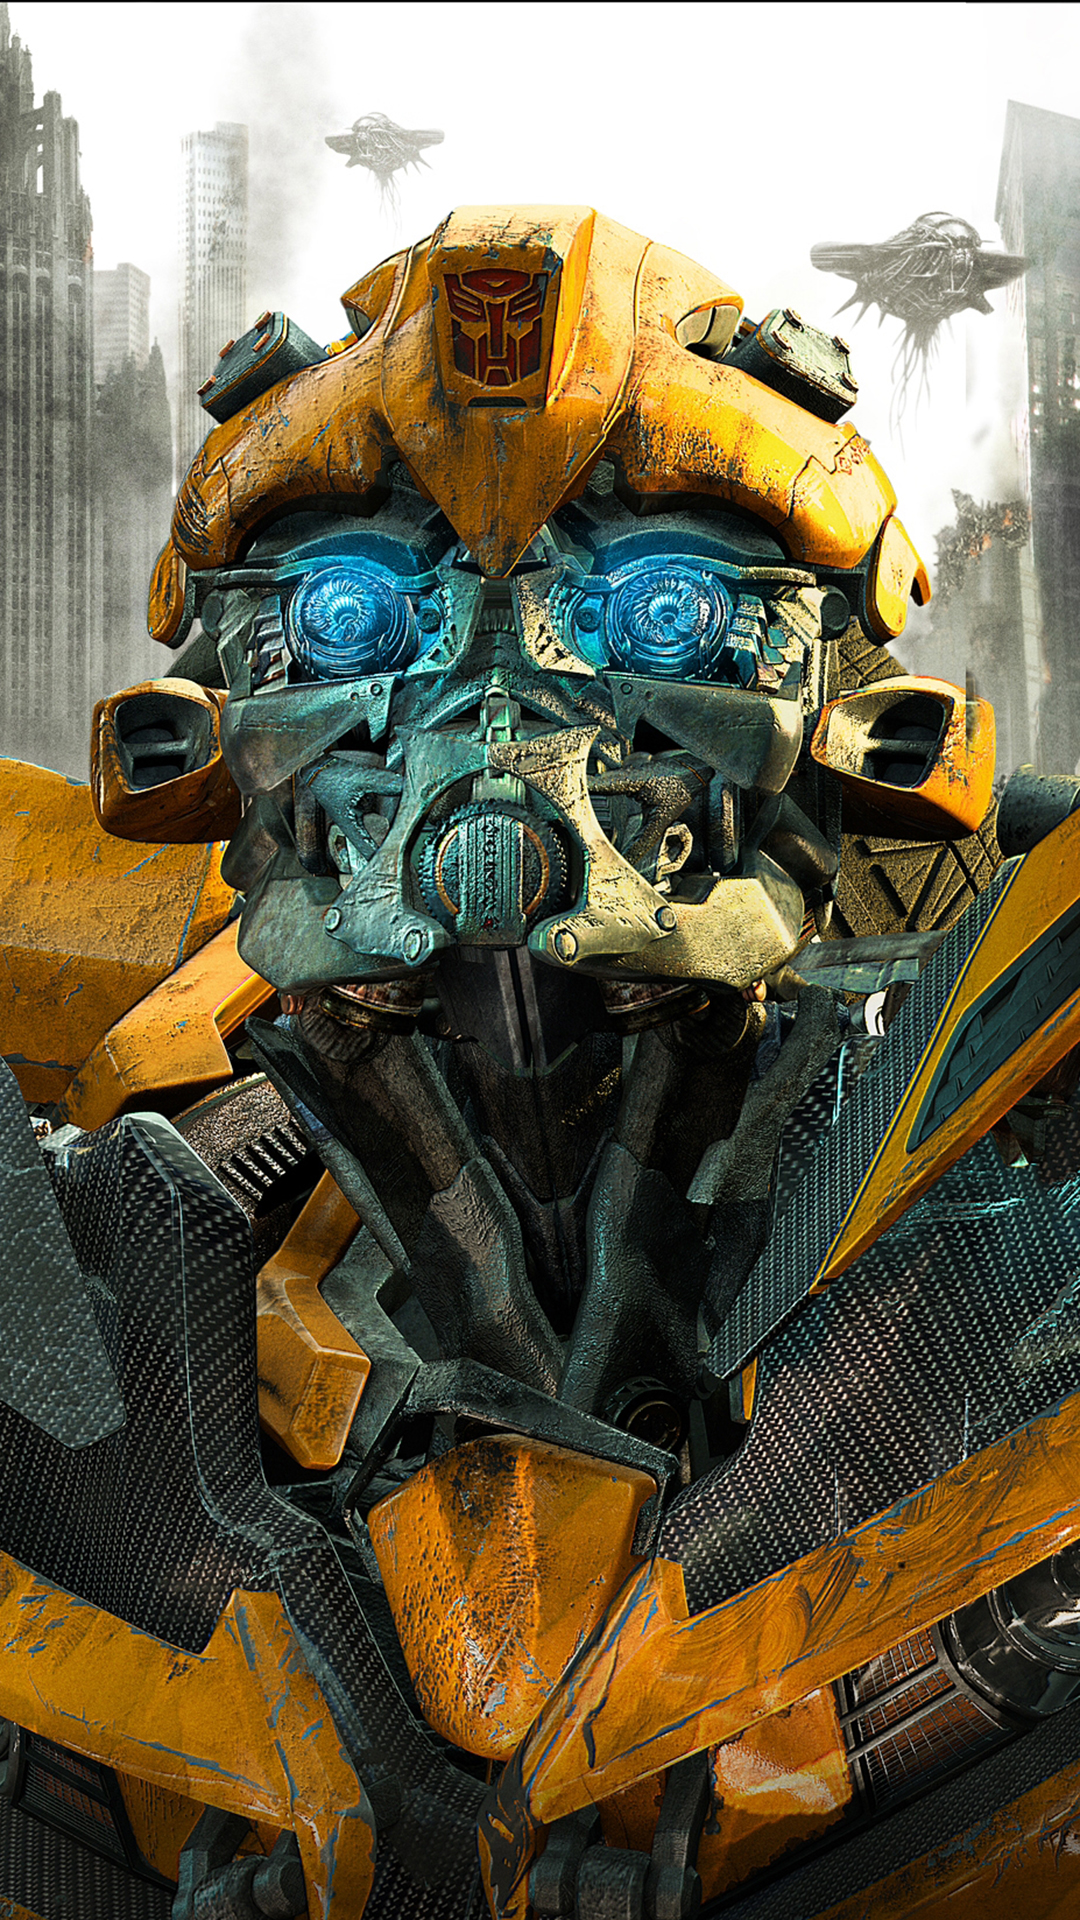 Transformers Autobot Bumblebee Htc One Wallpaper - Poster Transformers Dark Of The Moon 2011 - HD Wallpaper 